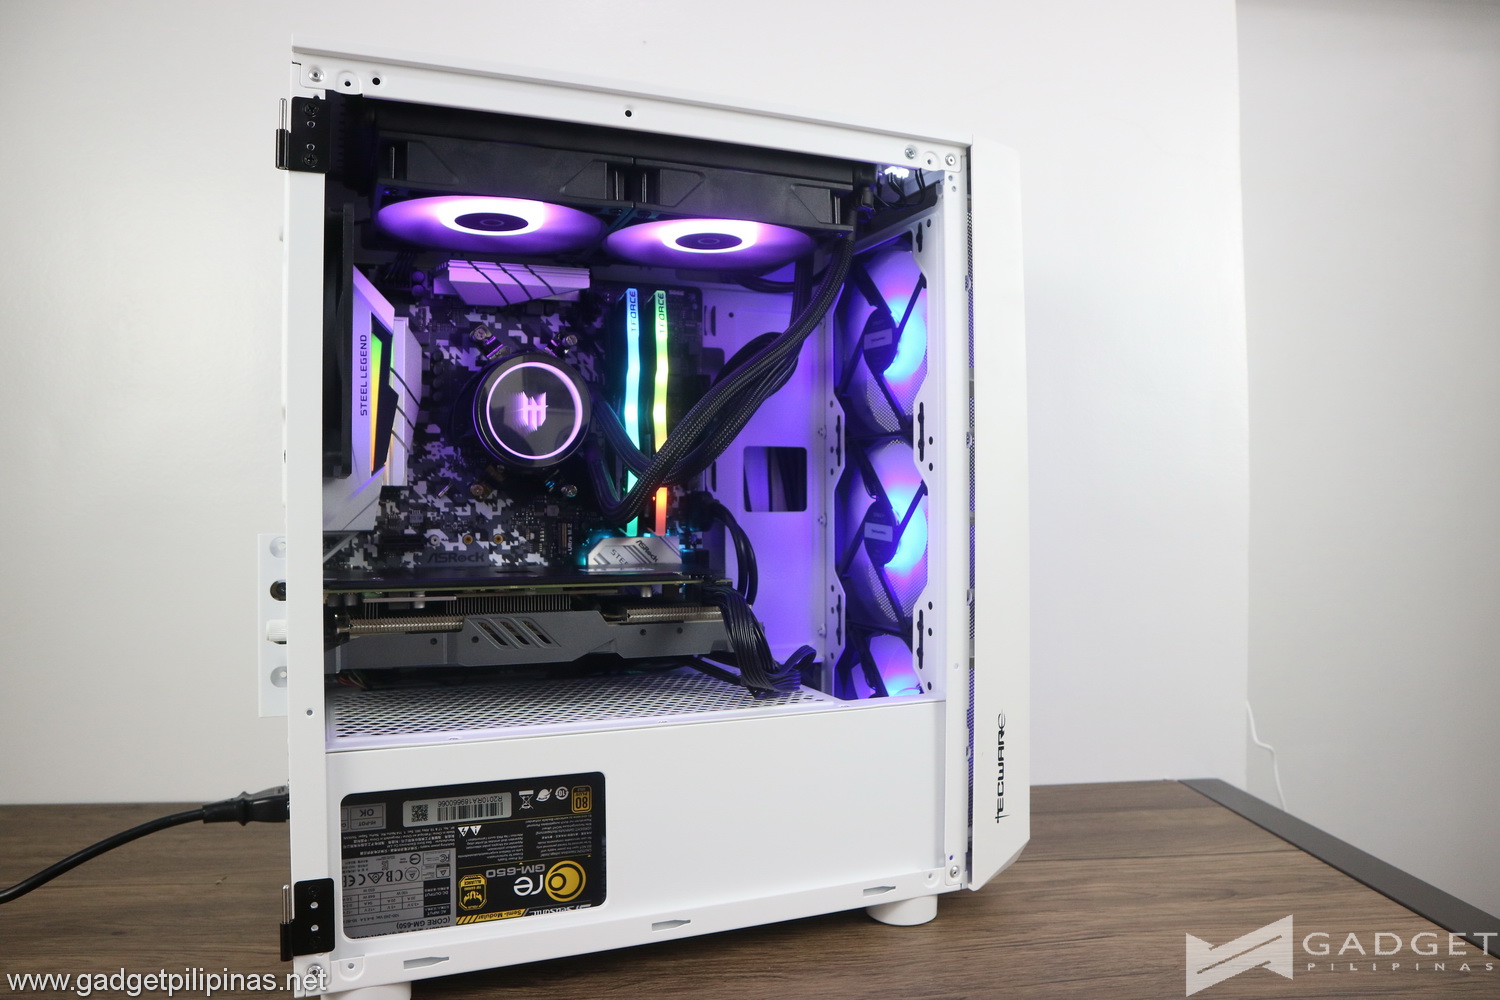 Php 50K Gaming PC Build Guide (Q1 2021) With Benchmarks - Gadget Pilipinas  | Tech News, Reviews, Benchmarks and Build Guides